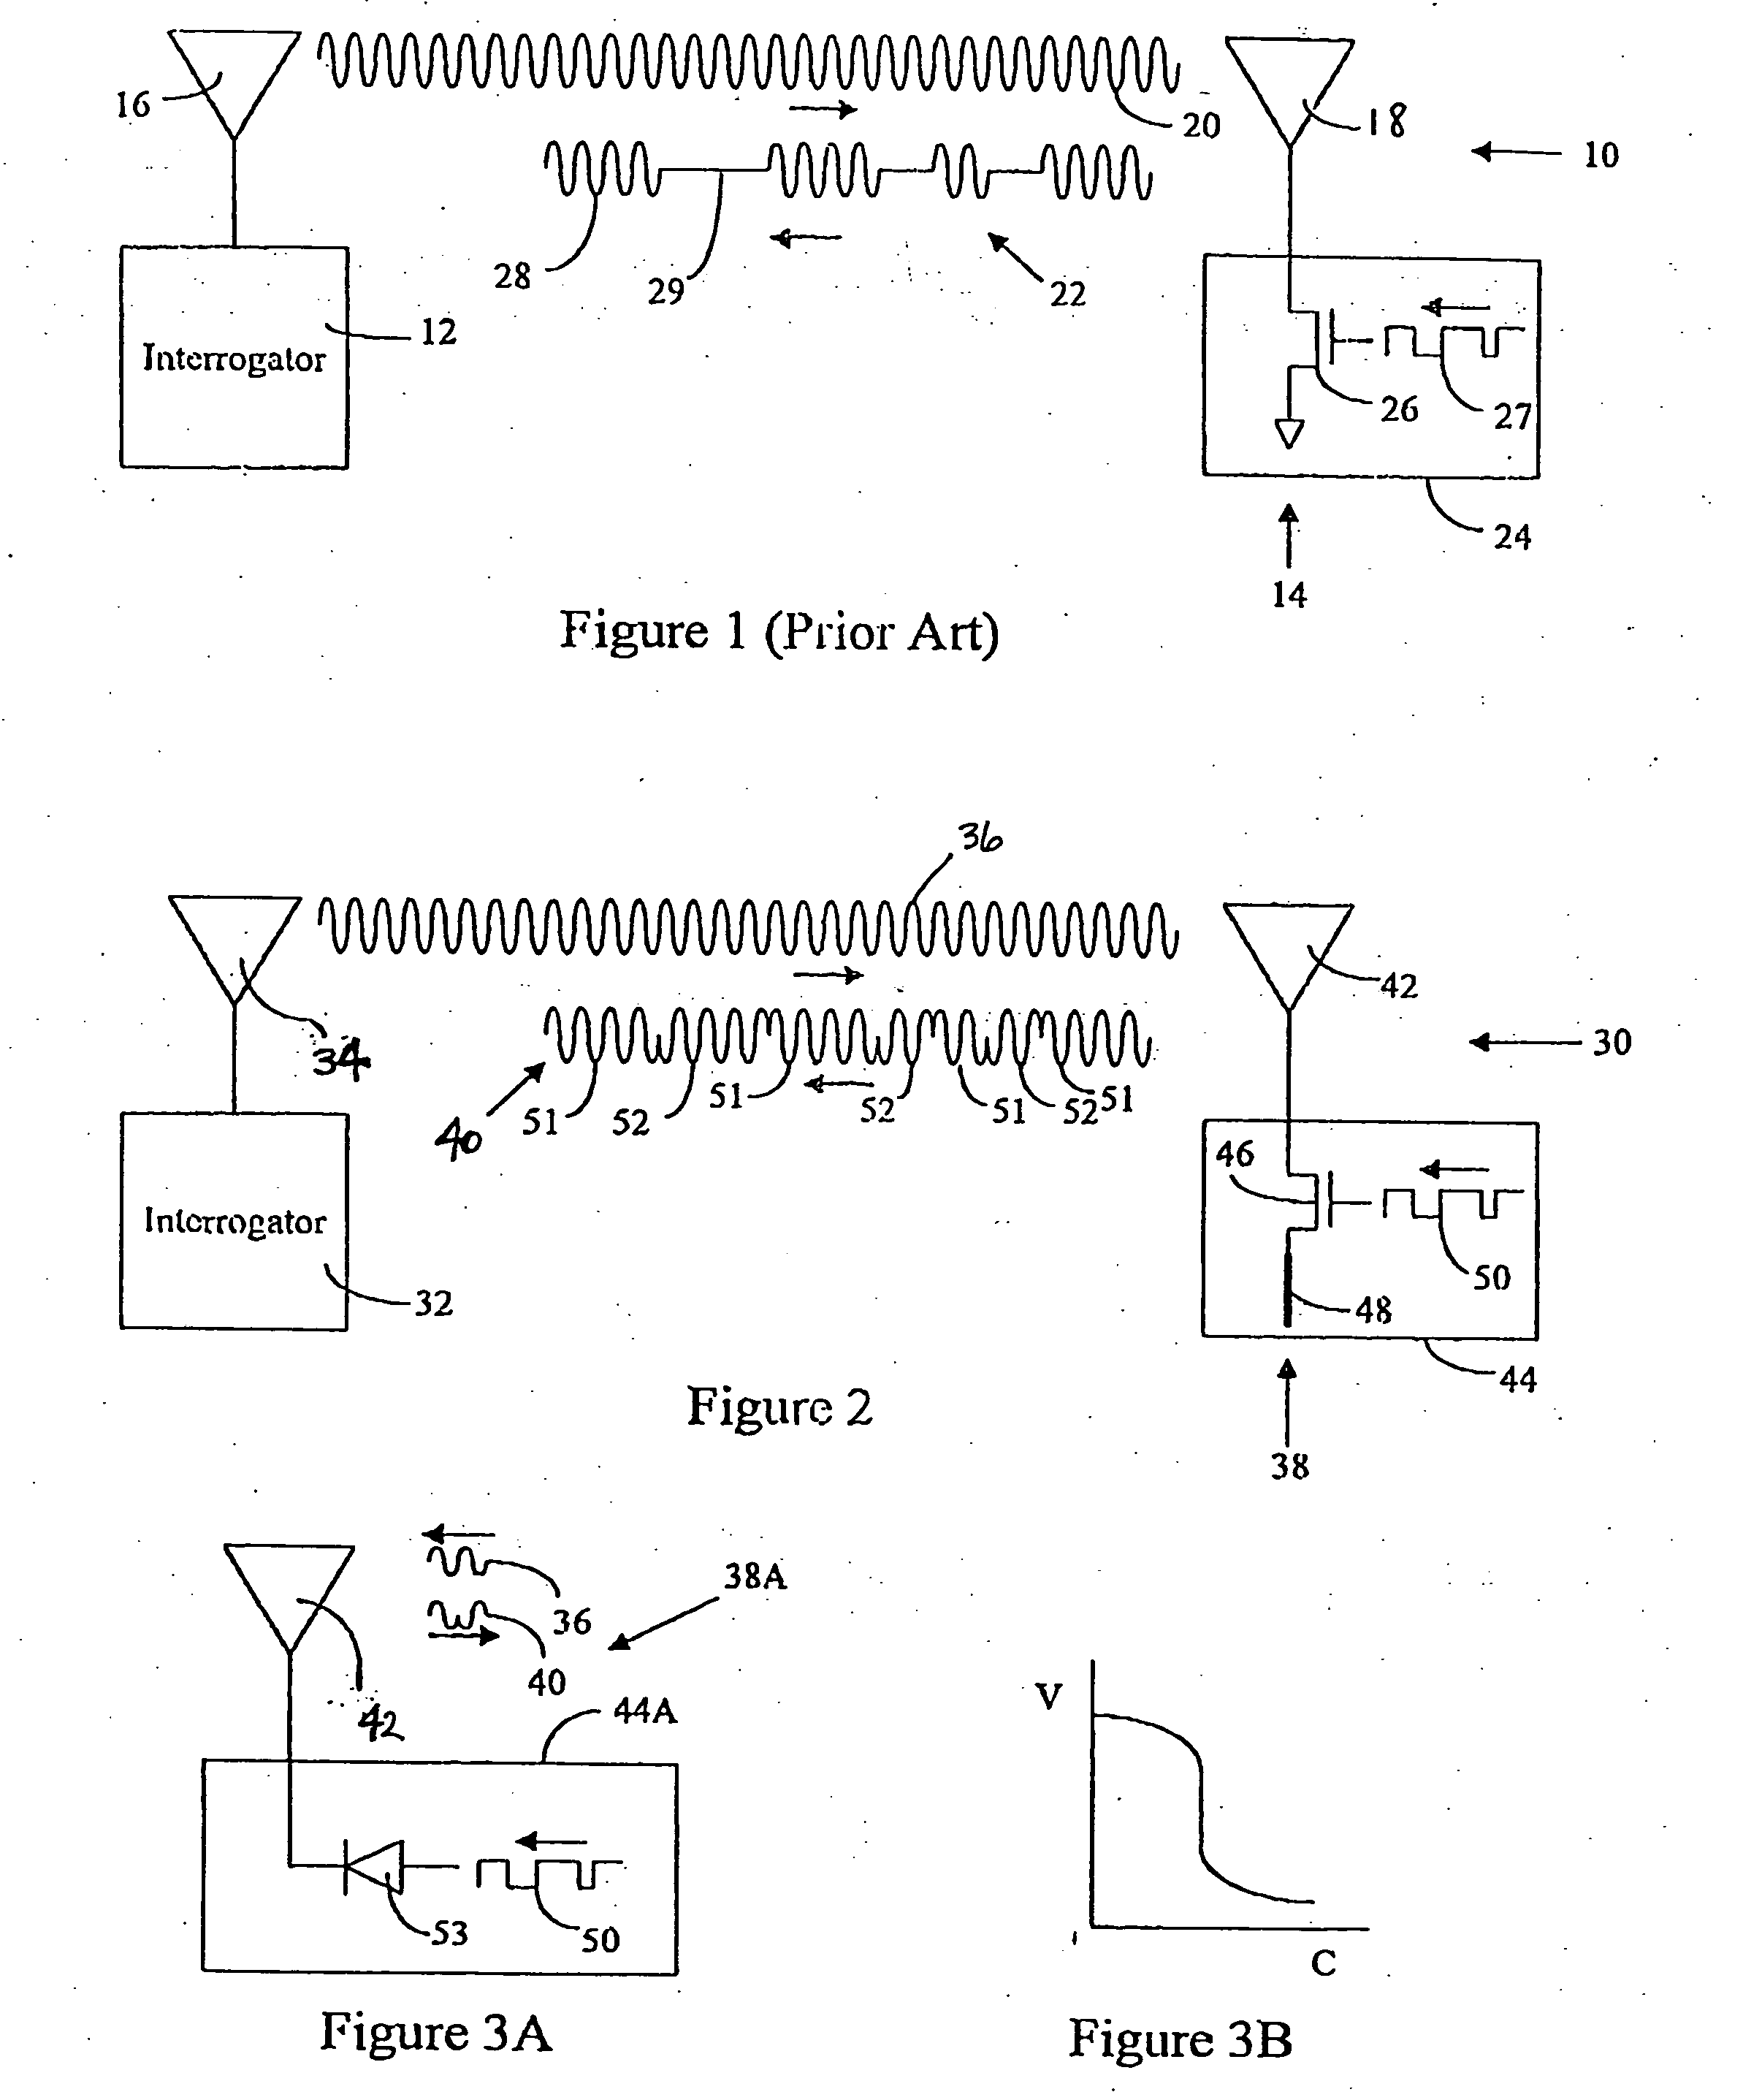 Phase modulation in RF tag